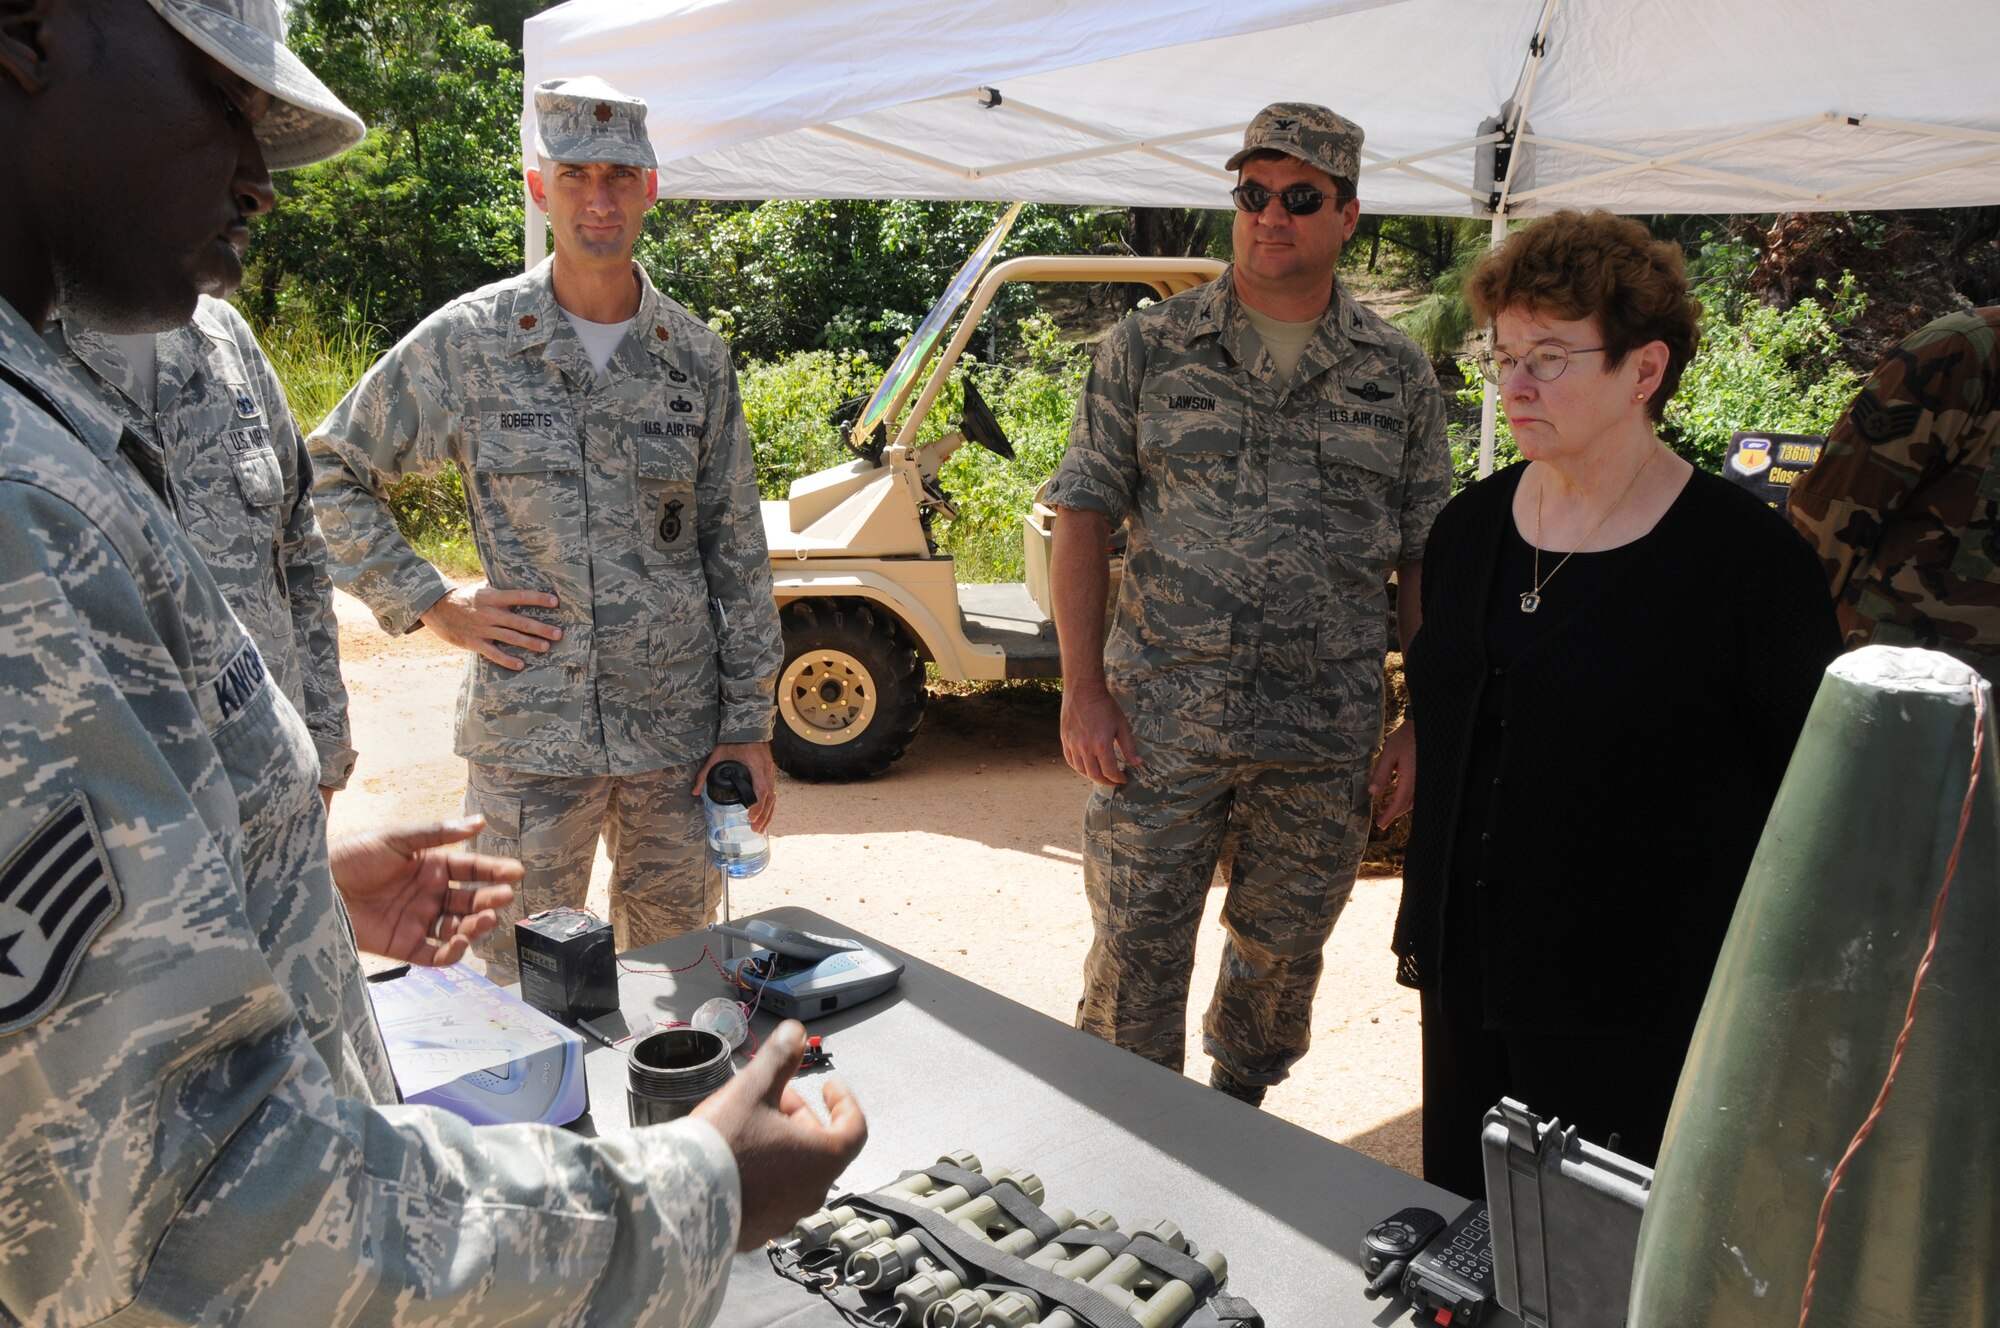 ANDERSEN AIR FORCE BASE, Guam - Staff Sgt. Milton Knight, 736th Security Forces Squadron explains the various types of Improvised Explosive Devices used downrange to Mrs. Natalie Crawford, Senior Fellow of the Research and Development Corporation and Senior Mentor for the U.S. Air Force Scientific Advisory Board during her visit here Dec. 17.  (U.S. Air Force photo by Senior Airman Nichelle Griffiths)